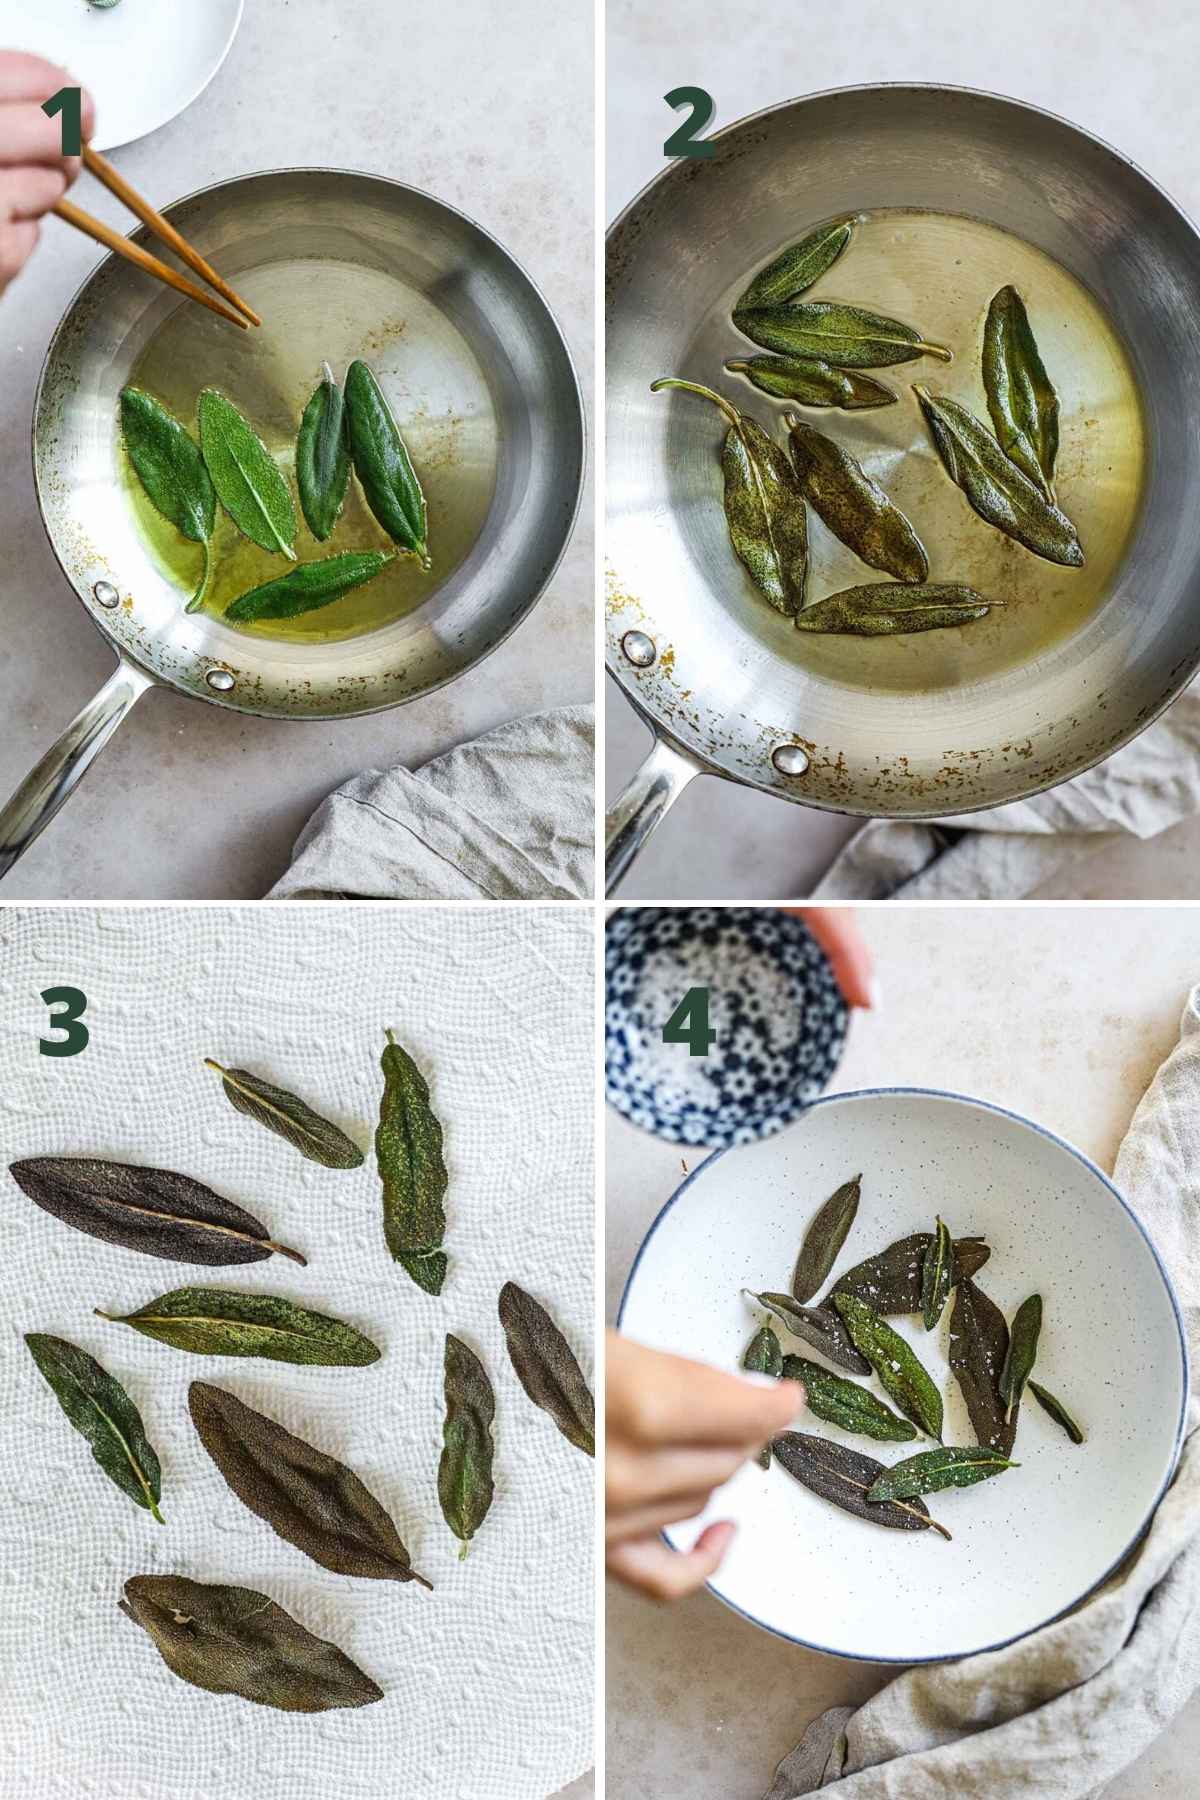 Steps to make crispy sage leaves, including heating the oil, placing the sage in the oil, frying it for 30 seconds, blotting the leaves on a paper towel, and seasoning with salt.